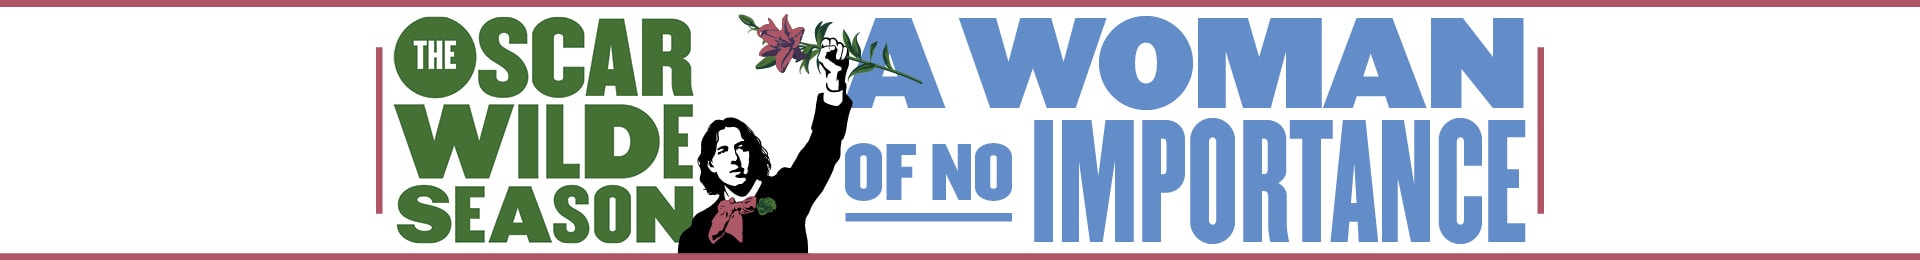 A Woman of No Importance banner image